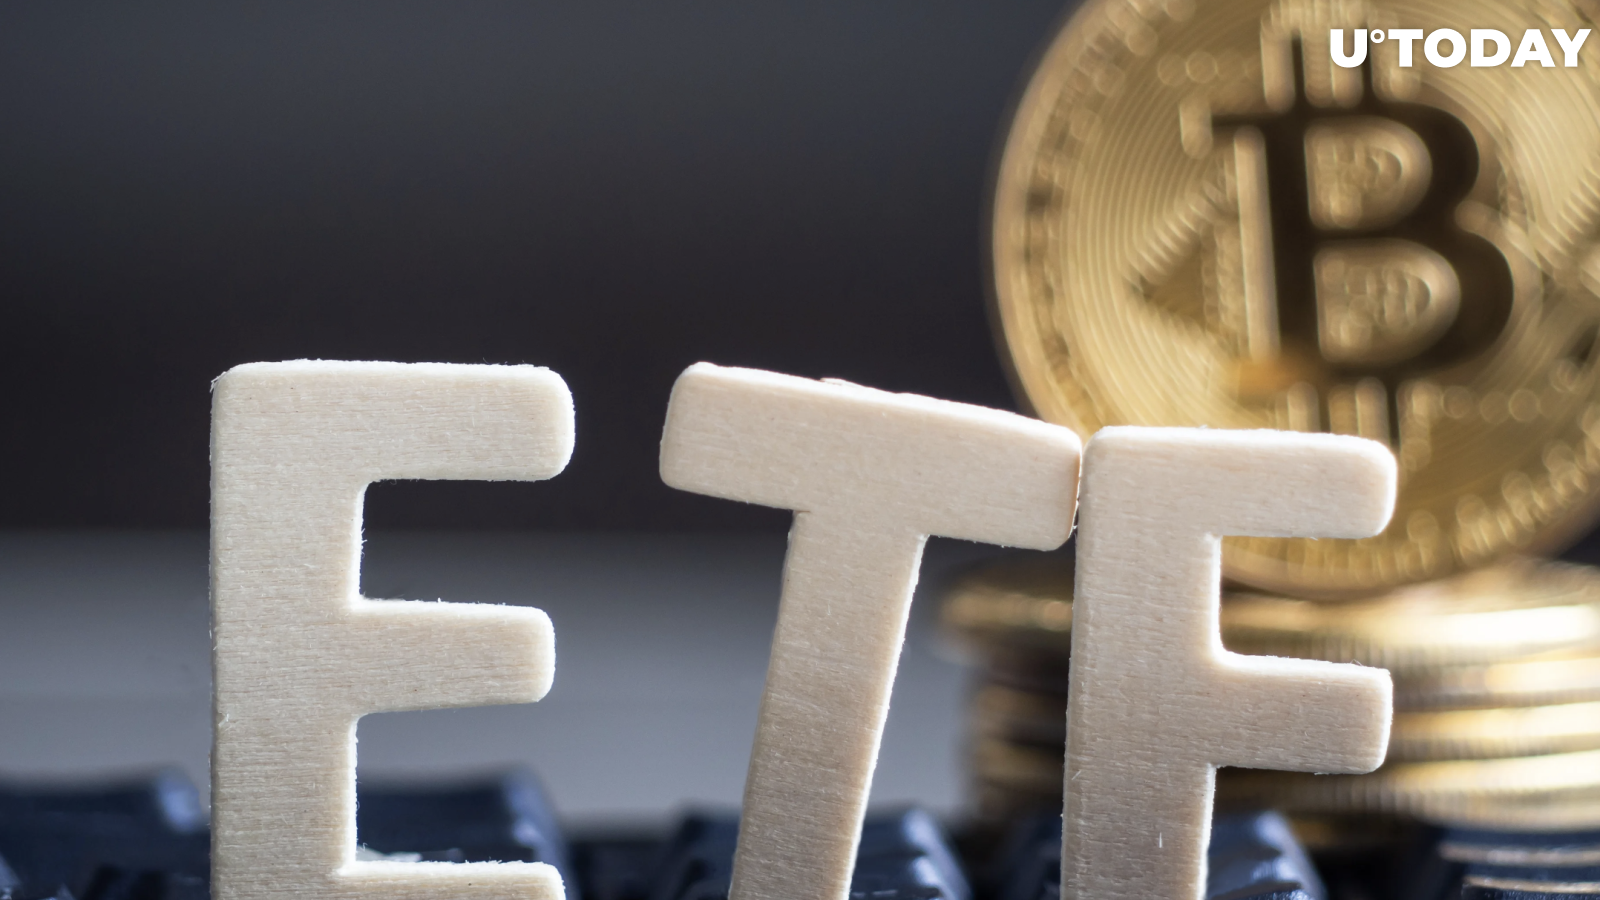 “Off to the Races”: SEC Kicks Off Clock on Slew of New Bitcoin ETF Applications